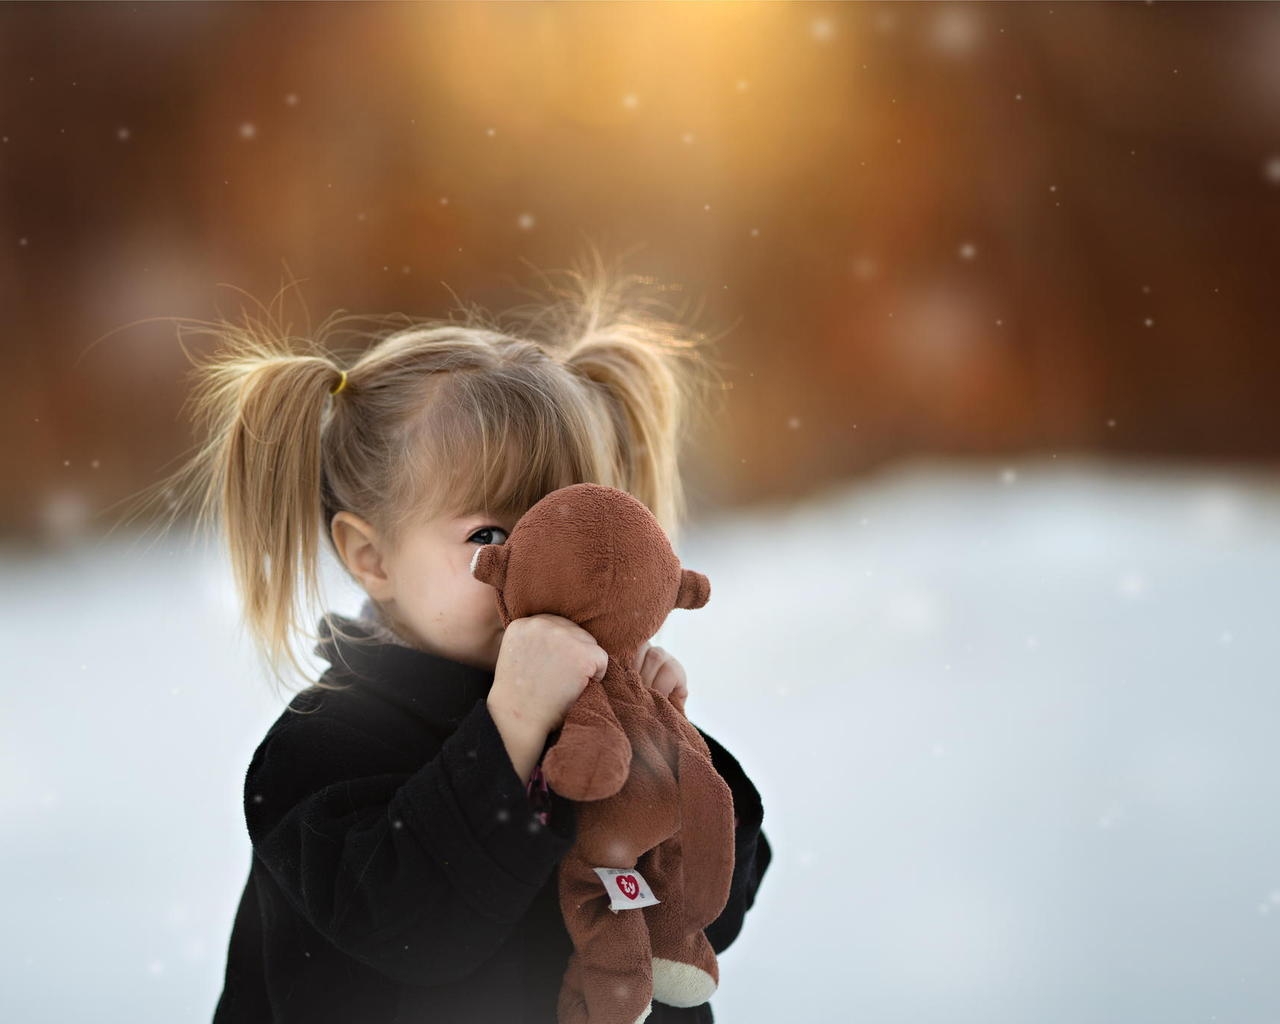 Sweet Little Girl With Her Toy  for 1280 x 1024 resolution